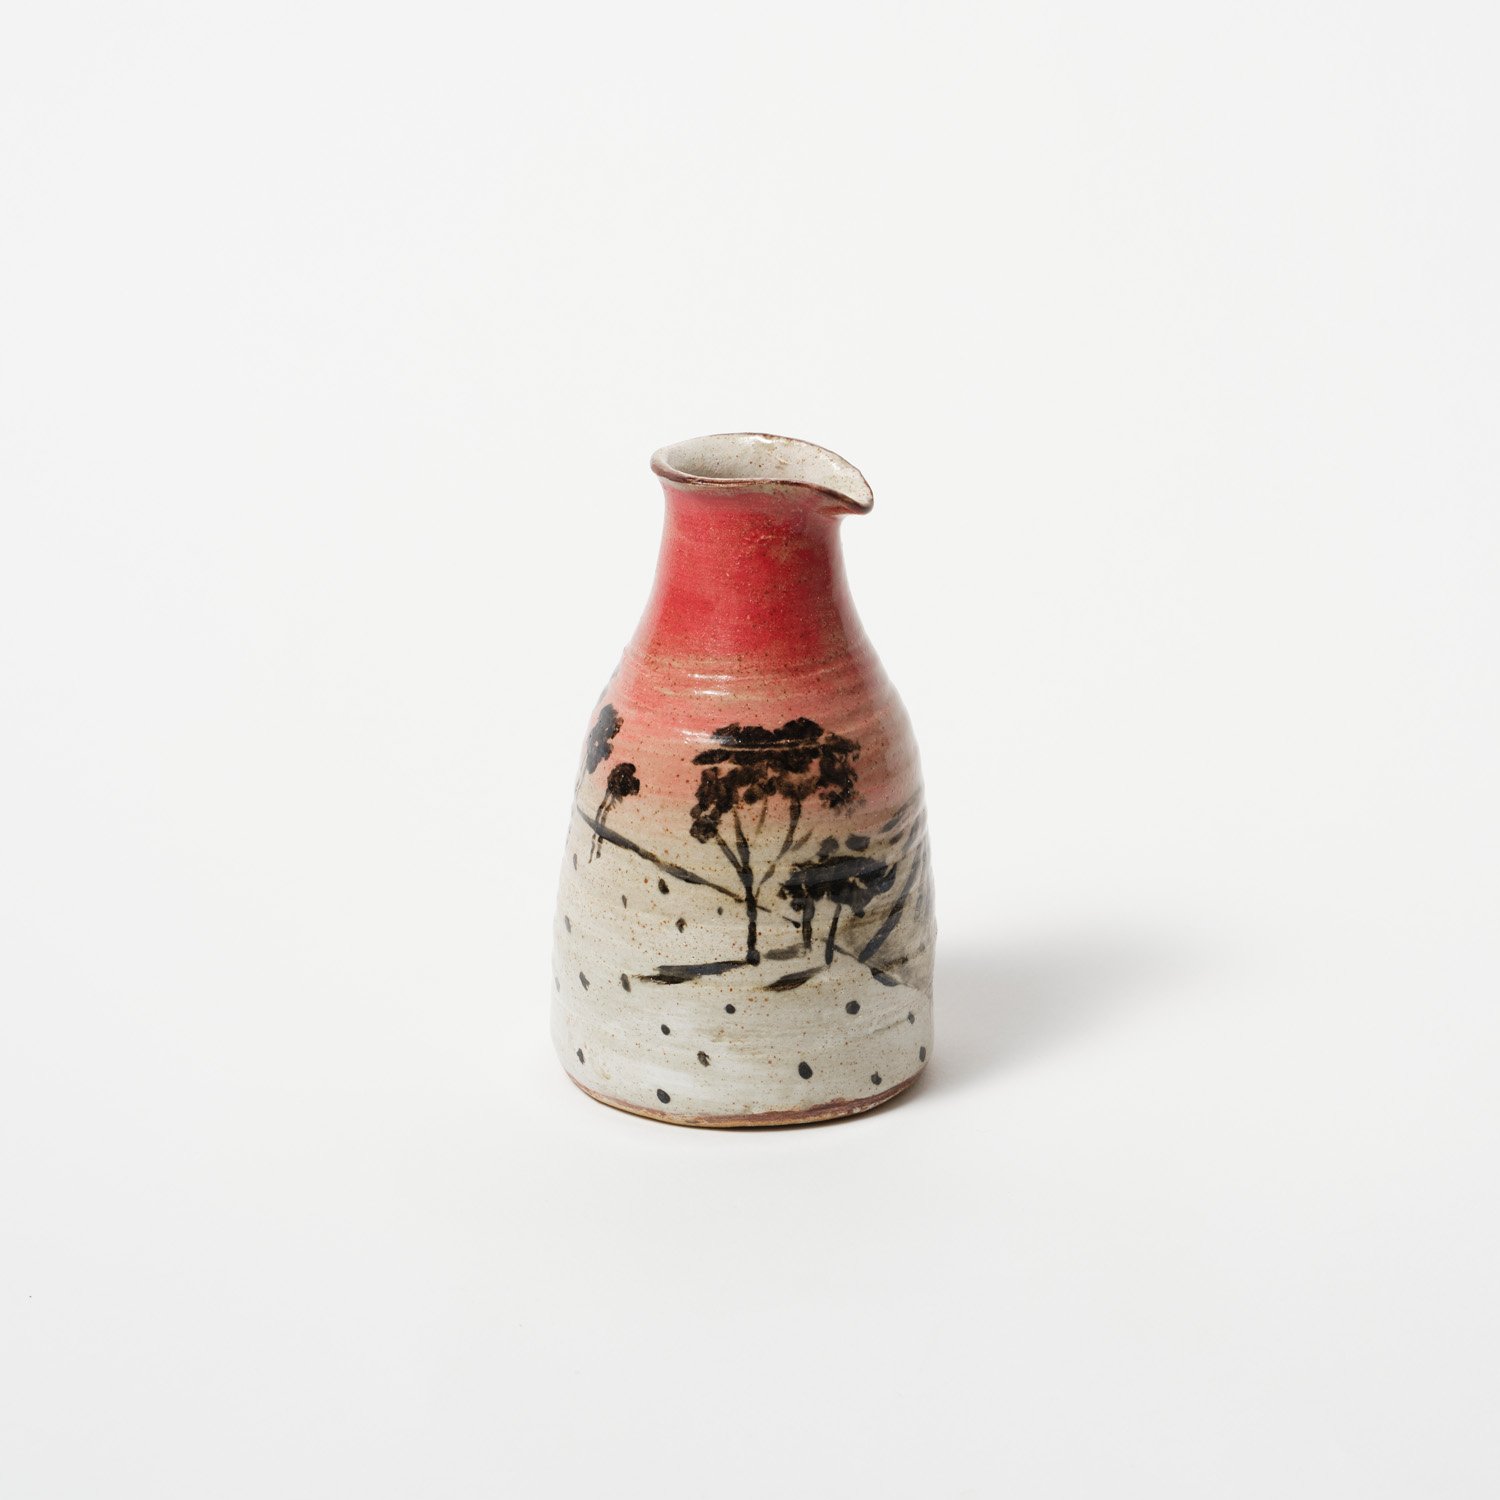 The Hills overlooking town - Ceramic small Vase – 4cm x 14cm x 8cm SOLD